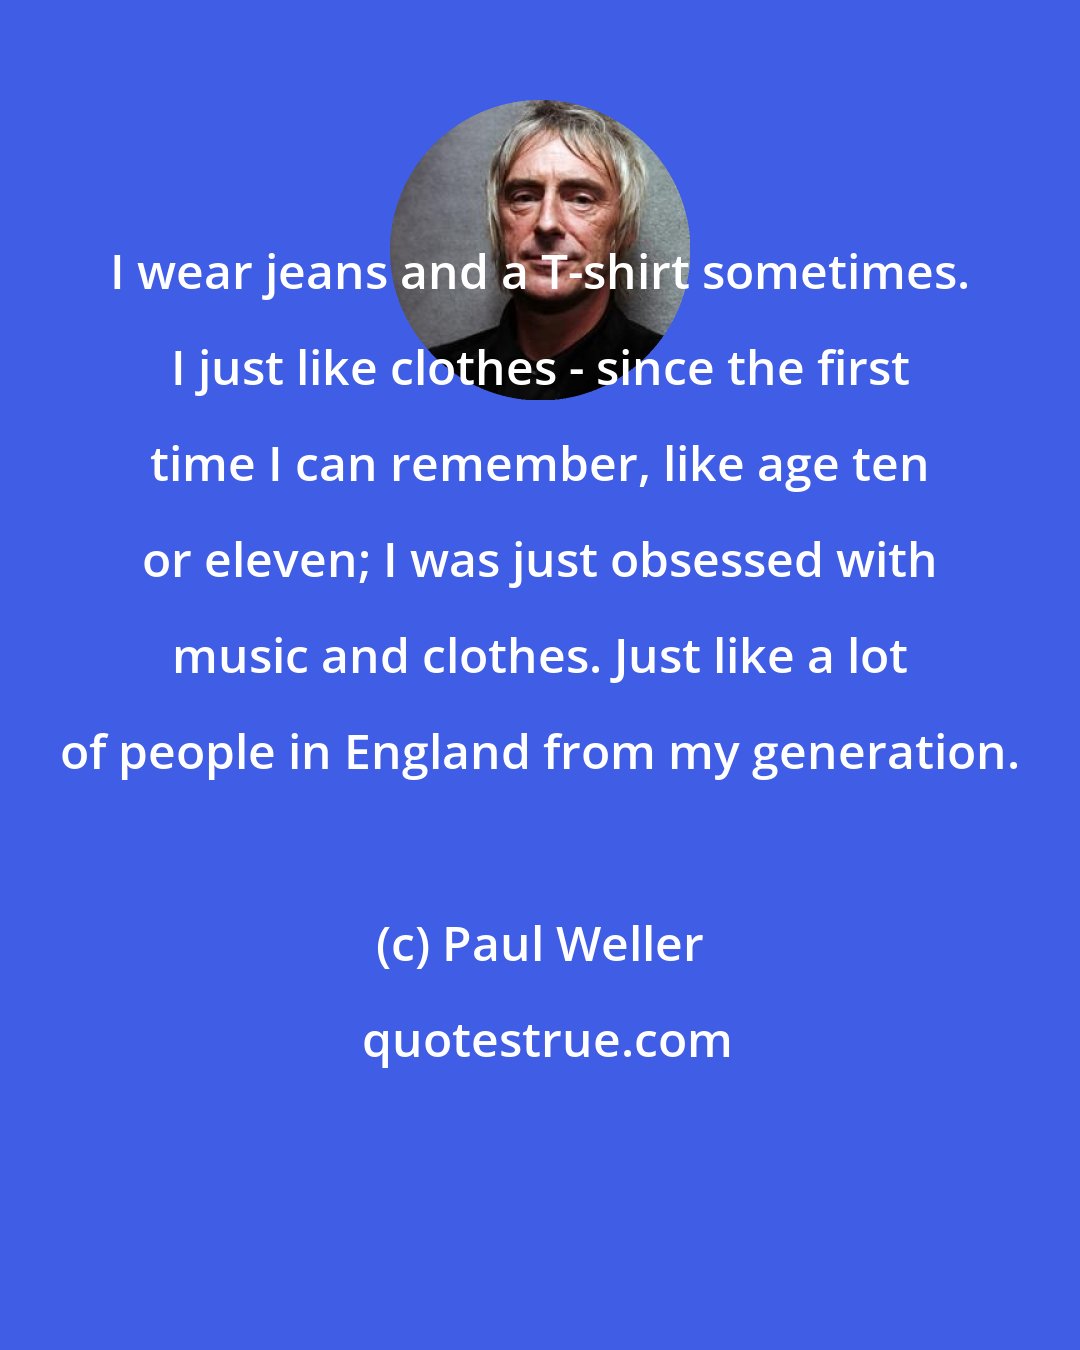 Paul Weller: I wear jeans and a T-shirt sometimes. I just like clothes - since the first time I can remember, like age ten or eleven; I was just obsessed with music and clothes. Just like a lot of people in England from my generation.